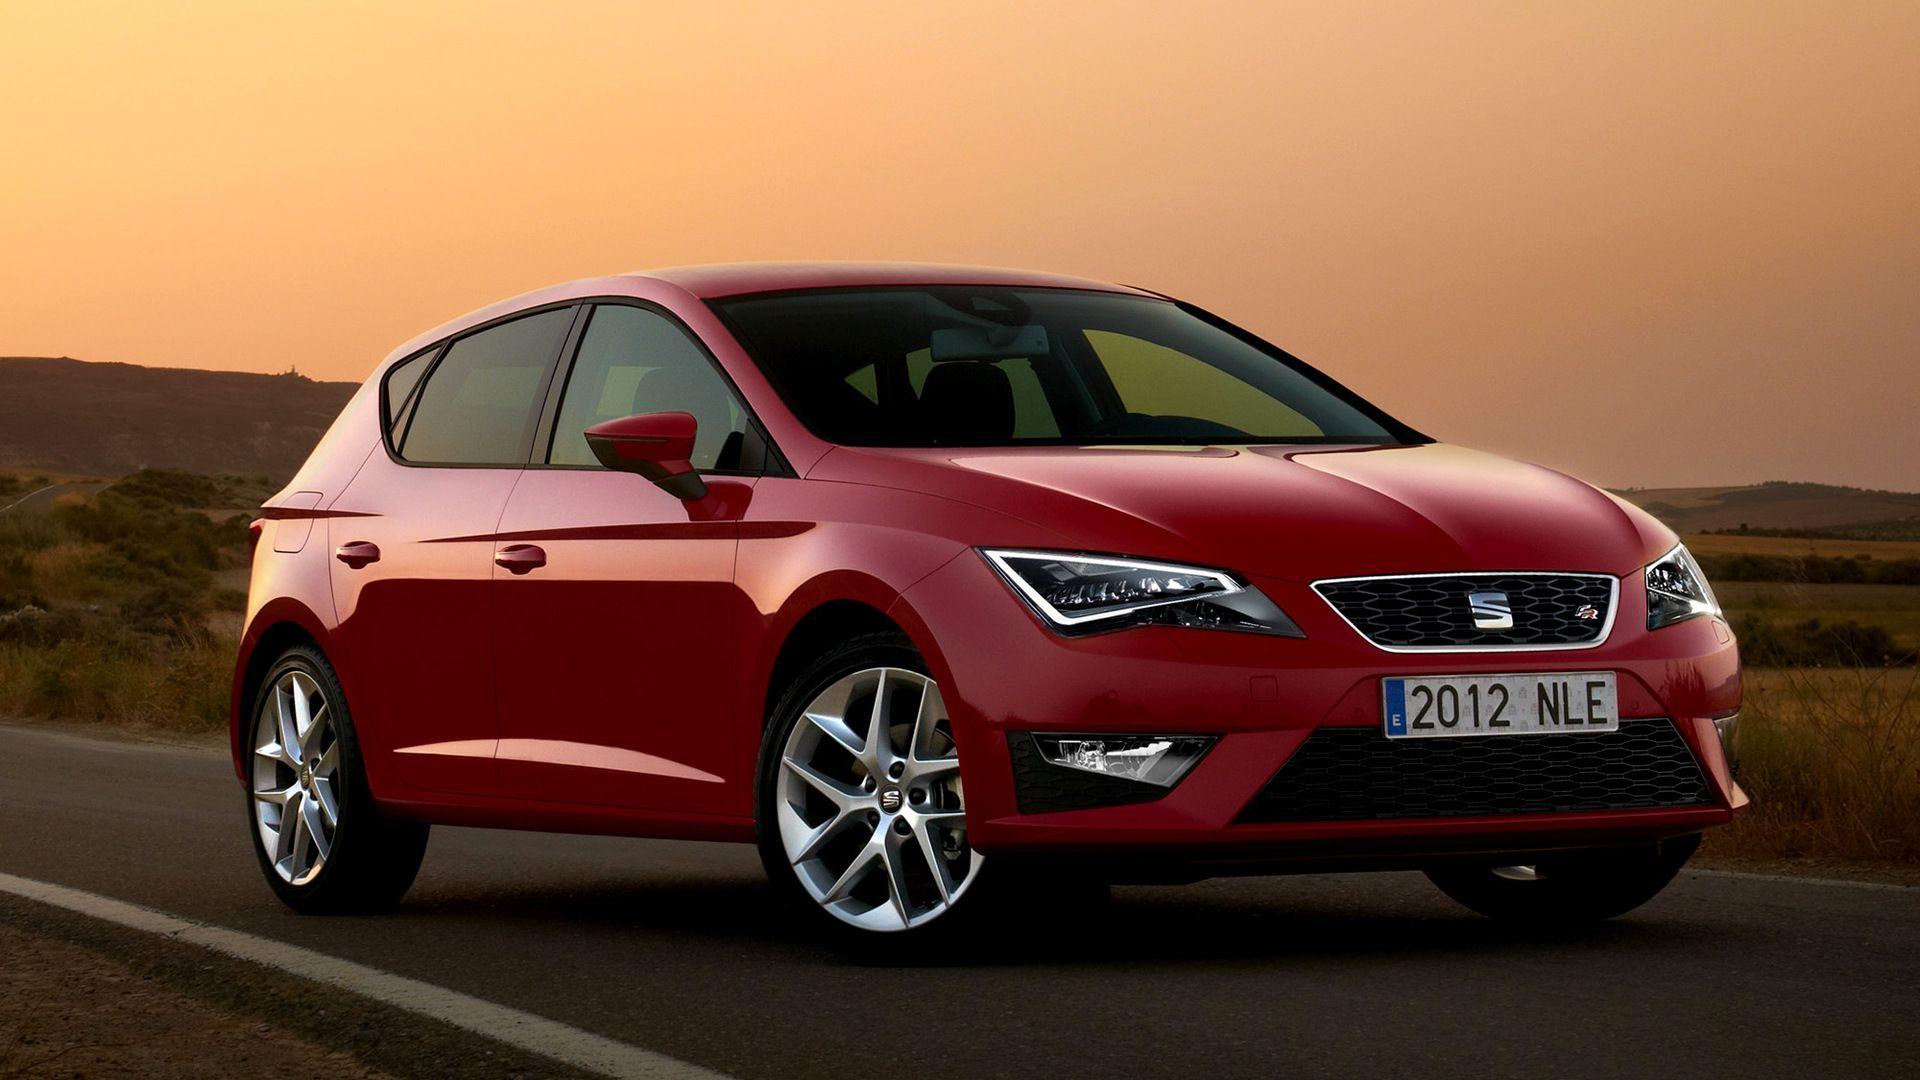 Seat Leon FR (2012) Wallpaper and HD Image